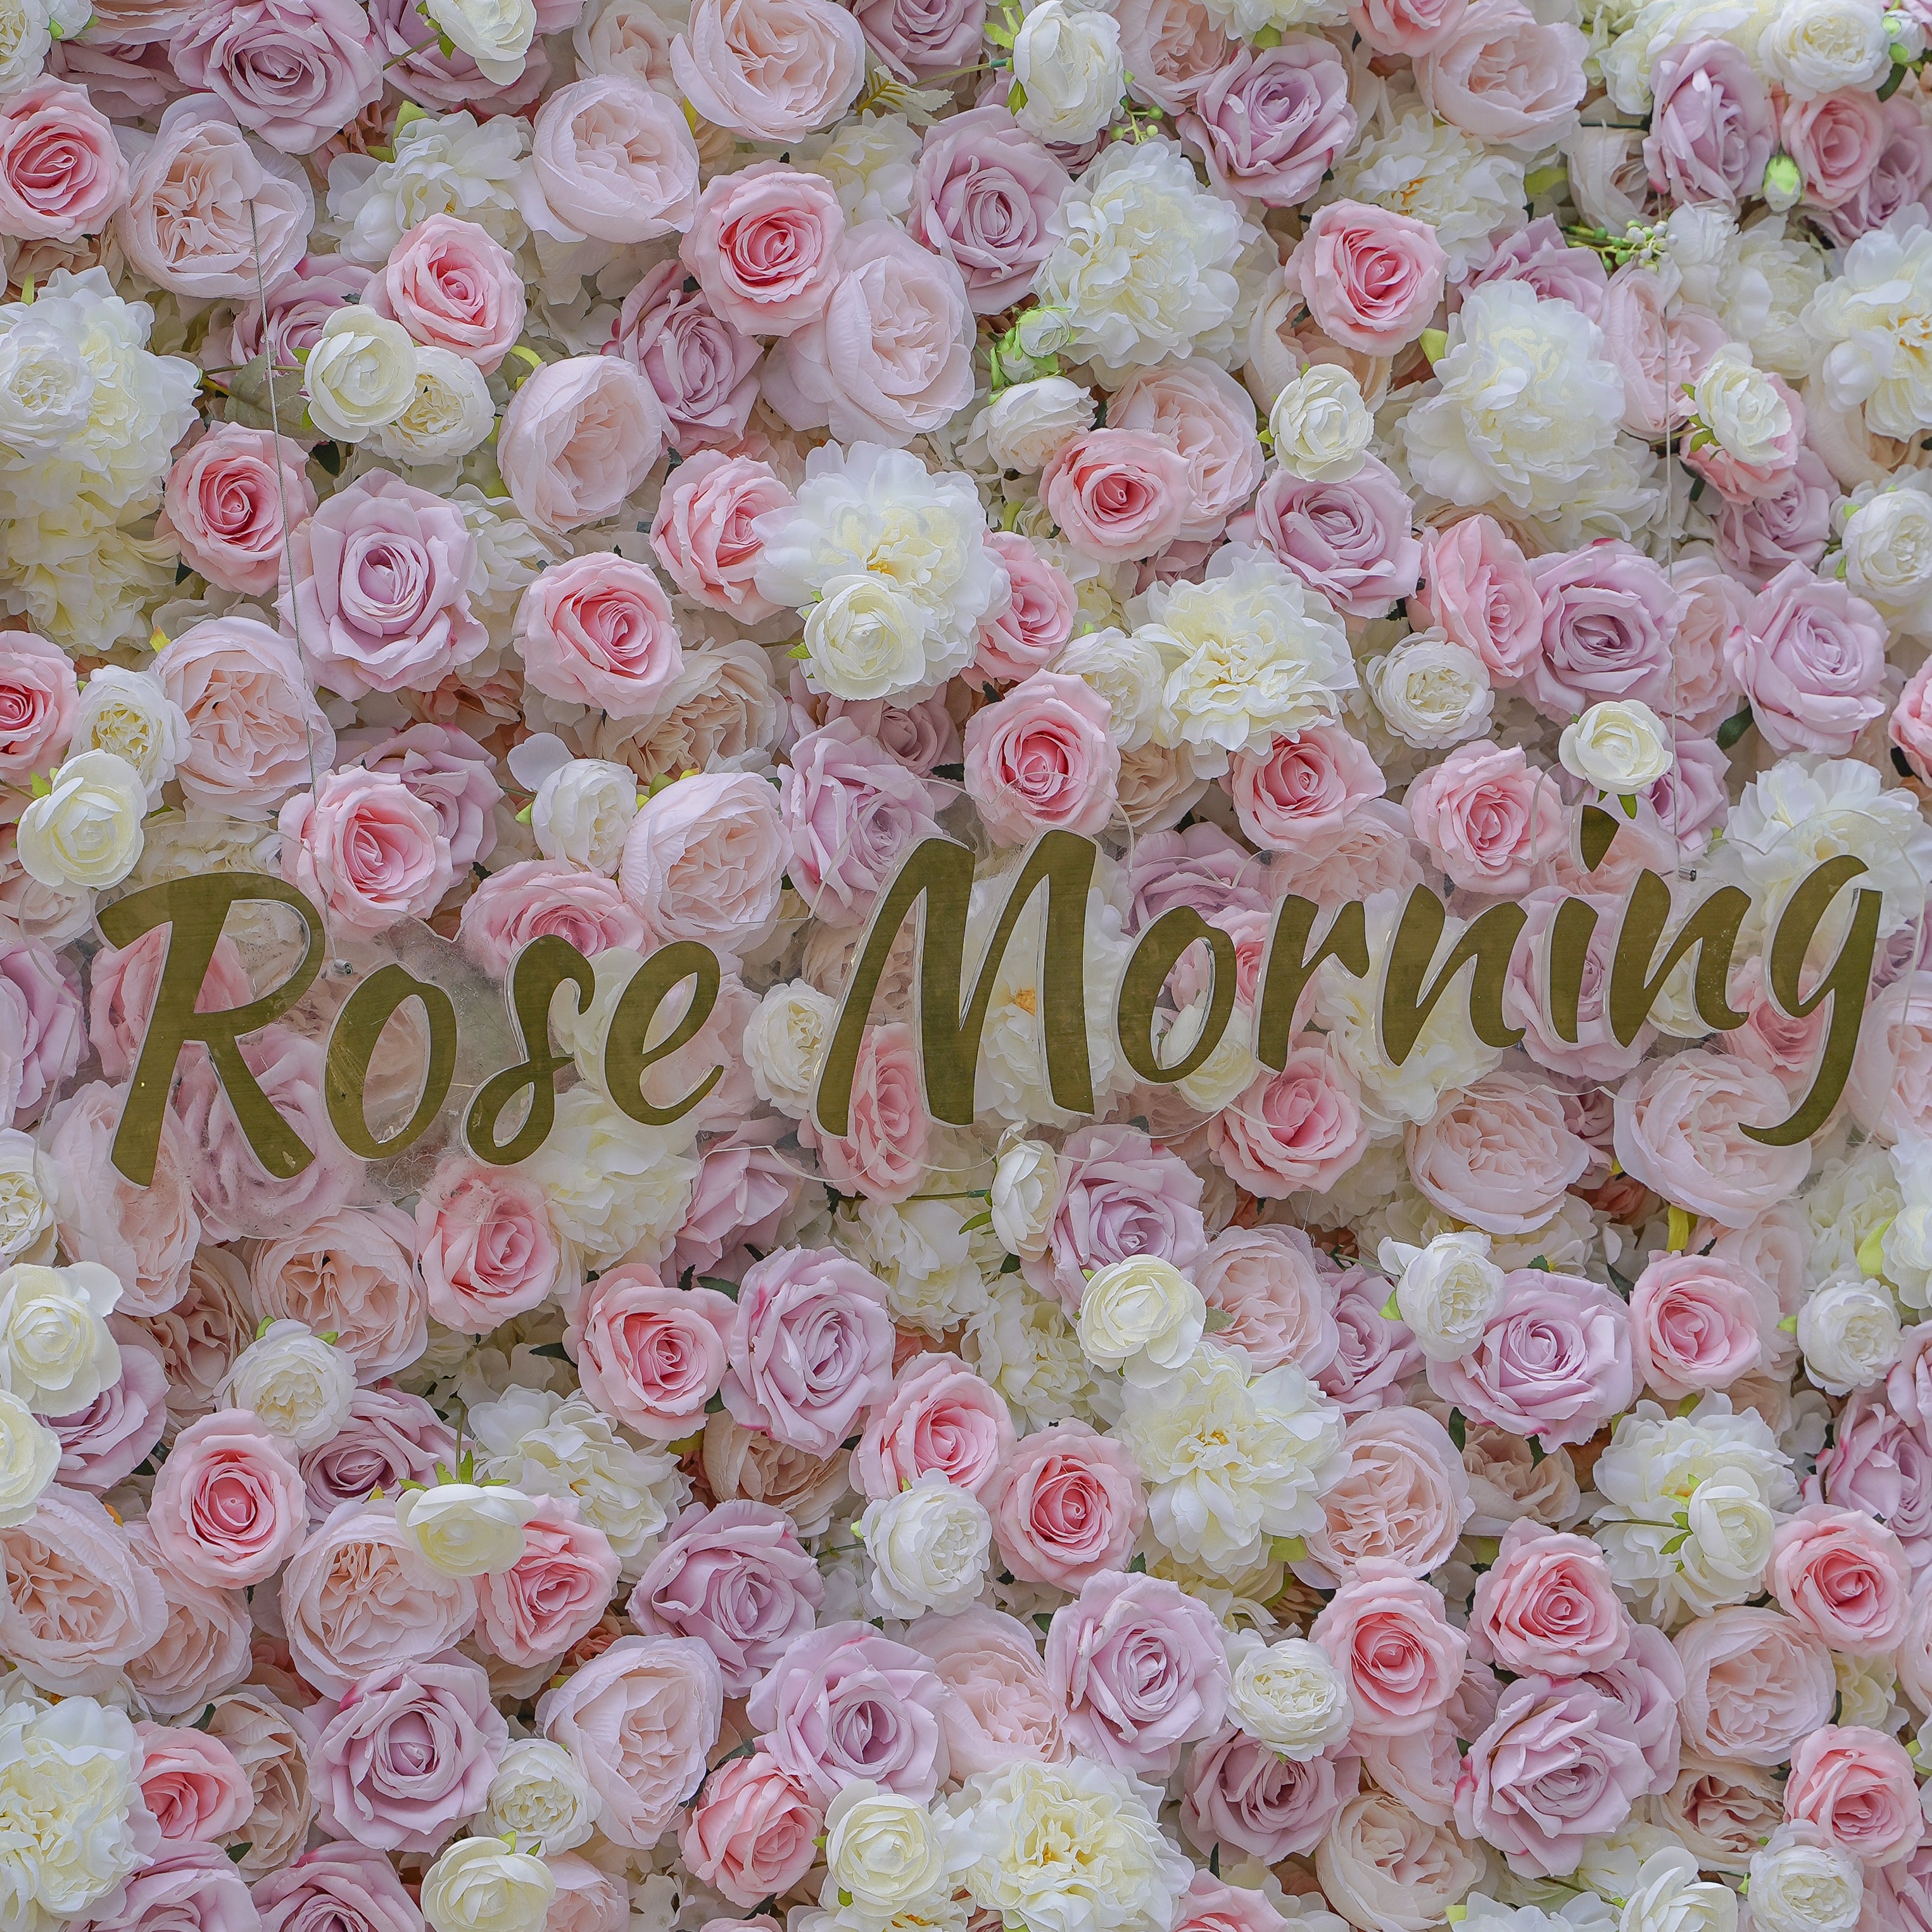 Hannah:  5D Fabric Artificial Flower Wall Rolling Up Curtain Flower Wall R013 - 8ft*8ft Rose Morning